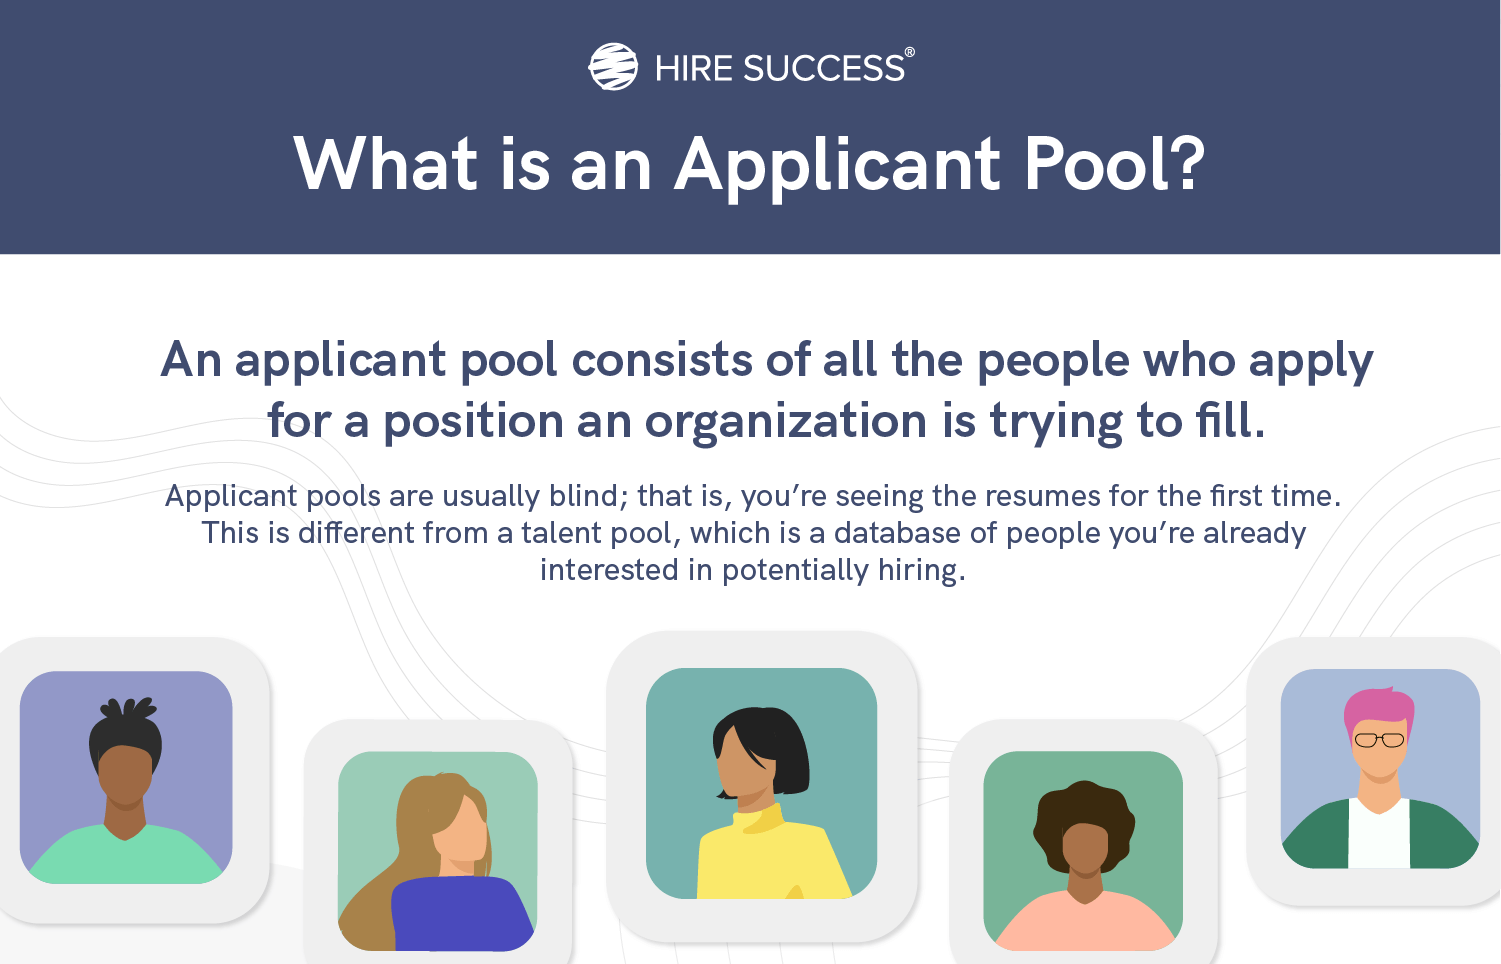 what is an applicant pool?